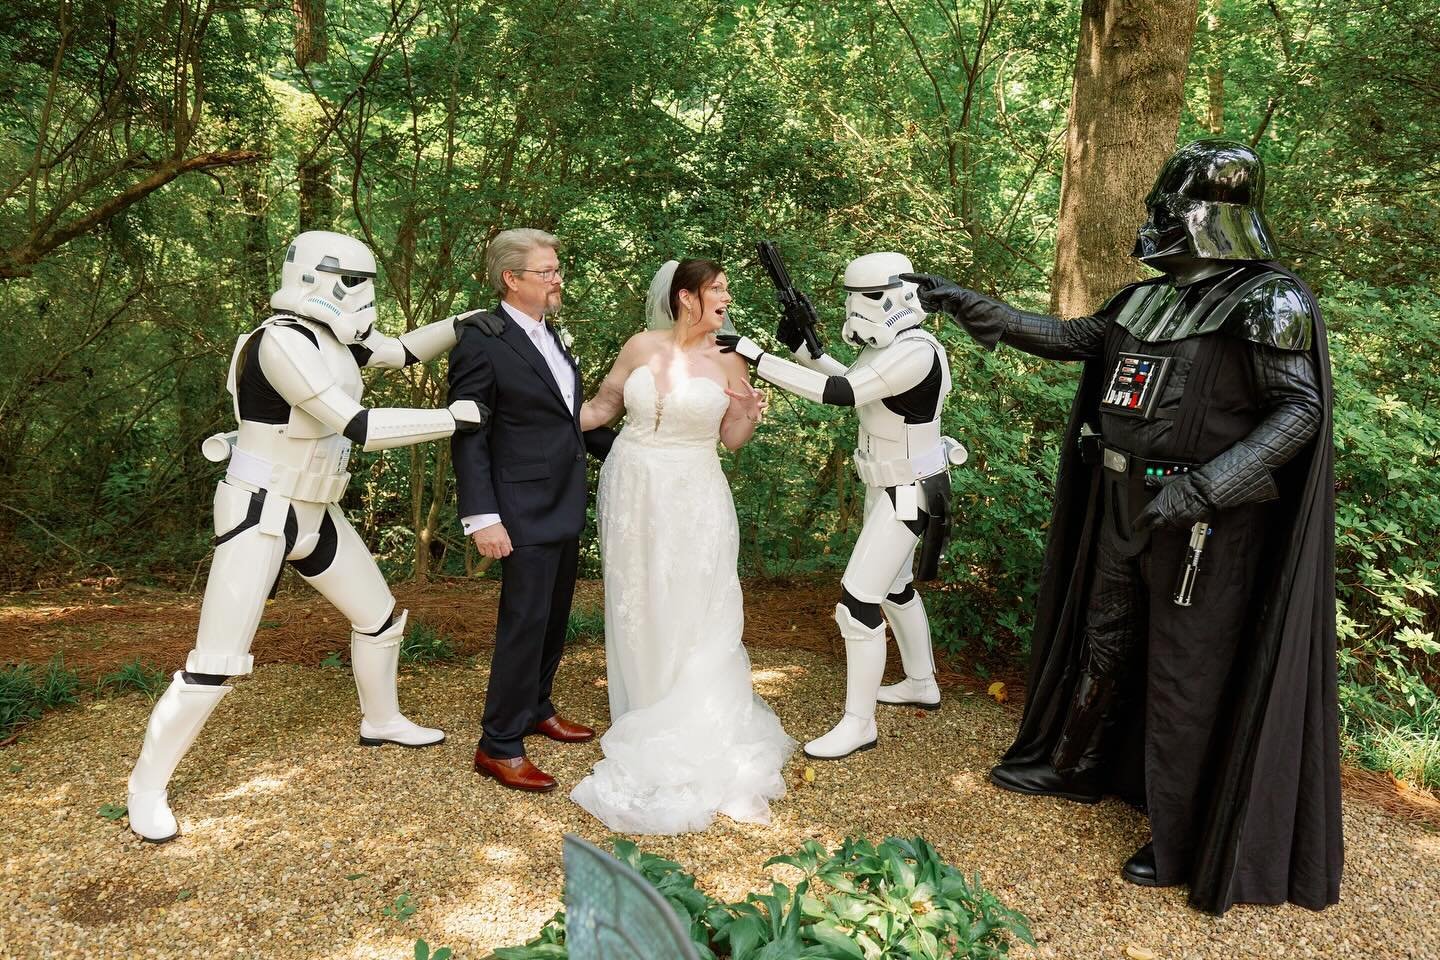 Star Wars fans unite against the Galactic Empire! How cool and quirky are this couple&rsquo;s wedding intruders? 
We love when couples incorporate their passions and personality into their big day! Check out our stories for a link to our blog post ab